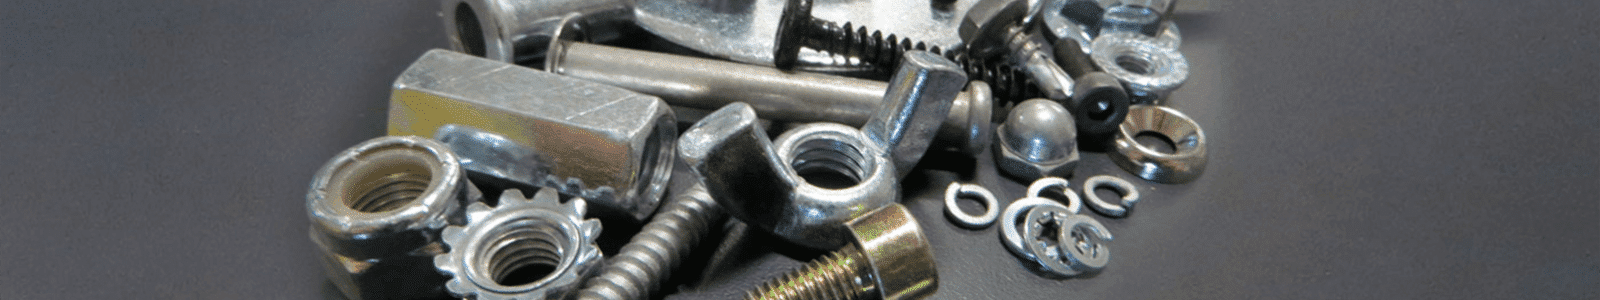 Bolts and screws for fastening